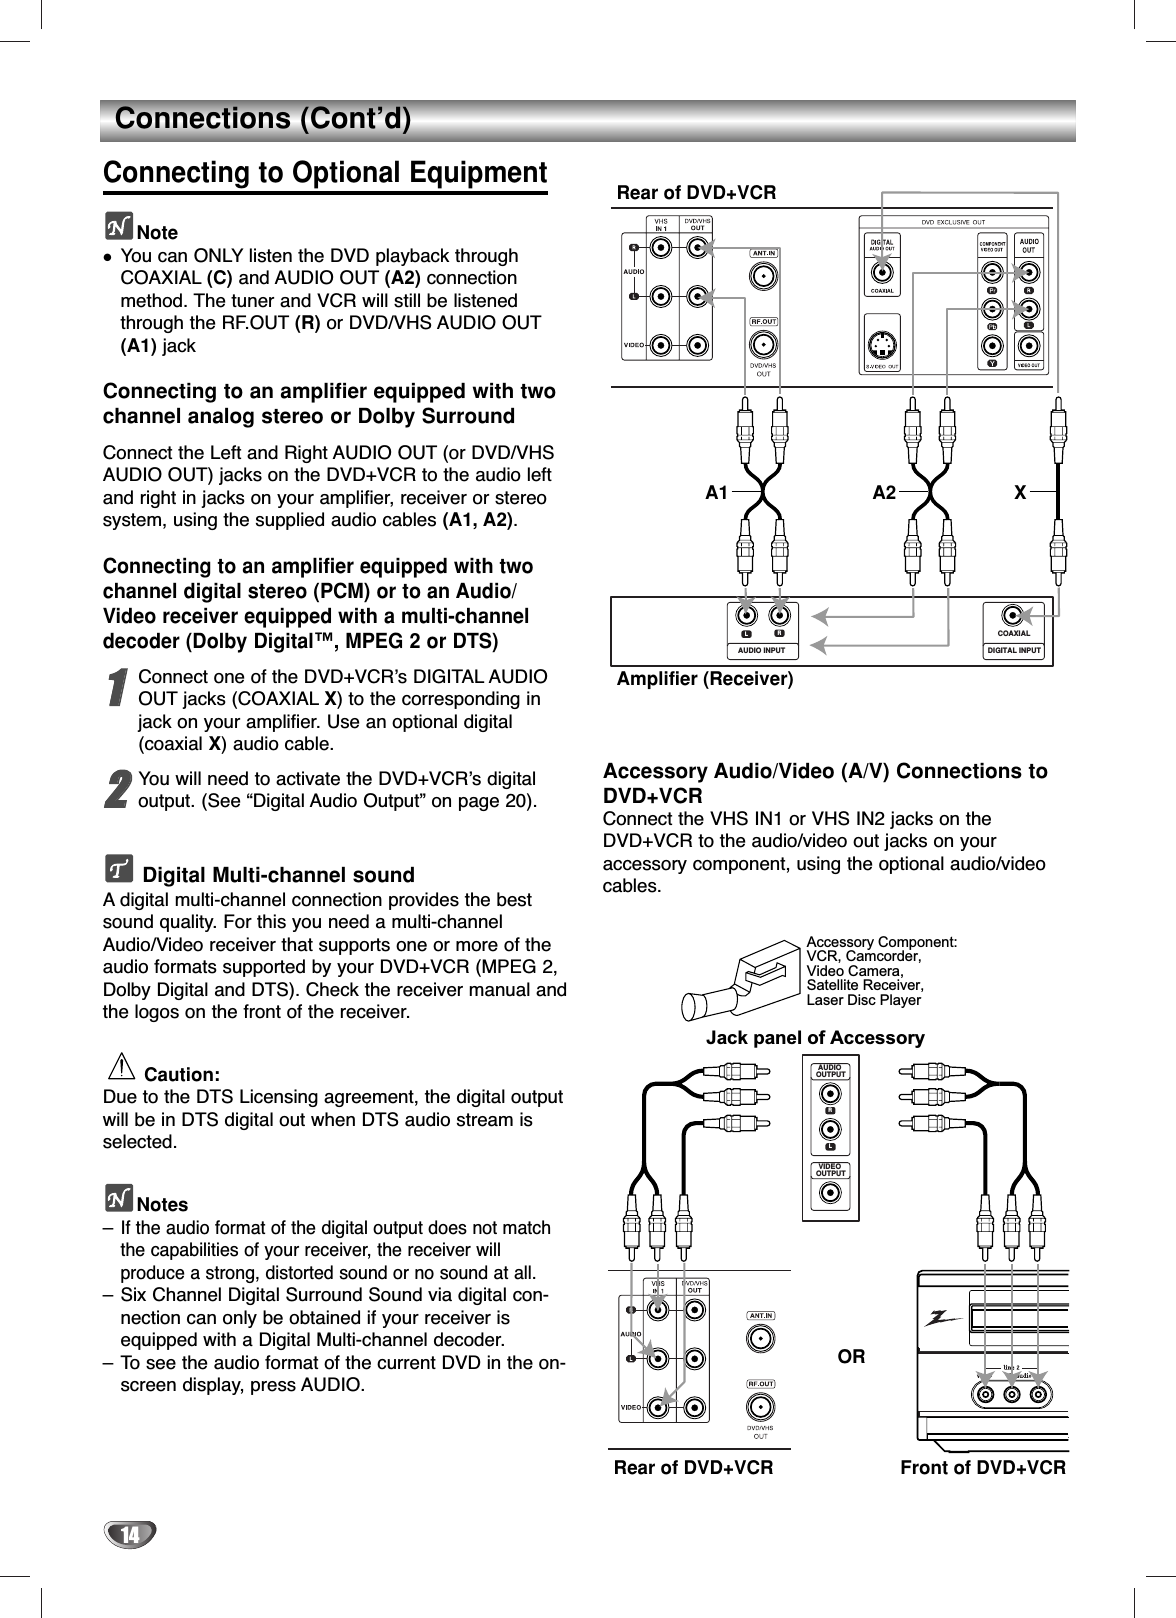 14Connections (Cont’d)Connecting to Optional EquipmentNoteYou can ONLY listen the DVD playback throughCOAXIAL (C) and AUDIO OUT (A2) connectionmethod. The tuner and VCR will still be listenedthrough the RF.OUT (R) or DVD/VHS AUDIO OUT(A1) jackConnecting to an amplifier equipped with twochannel analog stereo or Dolby SurroundConnect the Left and Right AUDIO OUT (or DVD/VHSAUDIO OUT) jacks on the DVD+VCR to the audio leftand right in jacks on your amplifier, receiver or stereosystem, using the supplied audio cables (A1, A2).Connecting to an amplifier equipped with twochannel digital stereo (PCM) or to an Audio/Video receiver equipped with a multi-channeldecoder (Dolby Digital™, MPEG 2 or DTS)11Connect one of the DVD+VCR’s DIGITAL AUDIOOUT jacks (COAXIAL X) to the corresponding injack on your amplifier. Use an optional digital (coaxial X) audio cable.22You will need to activate the DVD+VCR’s digitaloutput. (See “Digital Audio Output” on page 20).Digital Multi-channel soundA digital multi-channel connection provides the bestsound quality. For this you need a multi-channelAudio/Video receiver that supports one or more of theaudio formats supported by your DVD+VCR (MPEG 2,Dolby Digital and DTS). Check the receiver manual andthe logos on the front of the receiver.Caution:Due to the DTS Licensing agreement, the digital outputwill be in DTS digital out when DTS audio stream isselected.Notes–If the audio format of the digital output does not matchthe capabilities of your receiver, the receiver will produce a strong, distorted sound or no sound at all. – Six Channel Digital Surround Sound via digital con-nection can only be obtained if your receiver isequipped with a Digital Multi-channel decoder. – To see the audio format of the current DVD in the on-screen display, press AUDIO.Accessory Audio/Video (A/V) Connections toDVD+VCRConnect the VHS IN1 or VHS IN2 jacks on theDVD+VCR to the audio/video out jacks on your accessory component, using the optional audio/videocables.Rear of DVD+VCRAmplifier (Receiver)A2A1 XLRAUDIO INPUT DIGITAL INPUTCOAXIALAccessory Component:VCR, Camcorder, Video Camera,Satellite Receiver,Laser Disc PlayerLRVIDEO OUTPUTAUDIO OUTPUTJack panel of AccessoryRear of DVD+VCR Front of DVD+VCROR